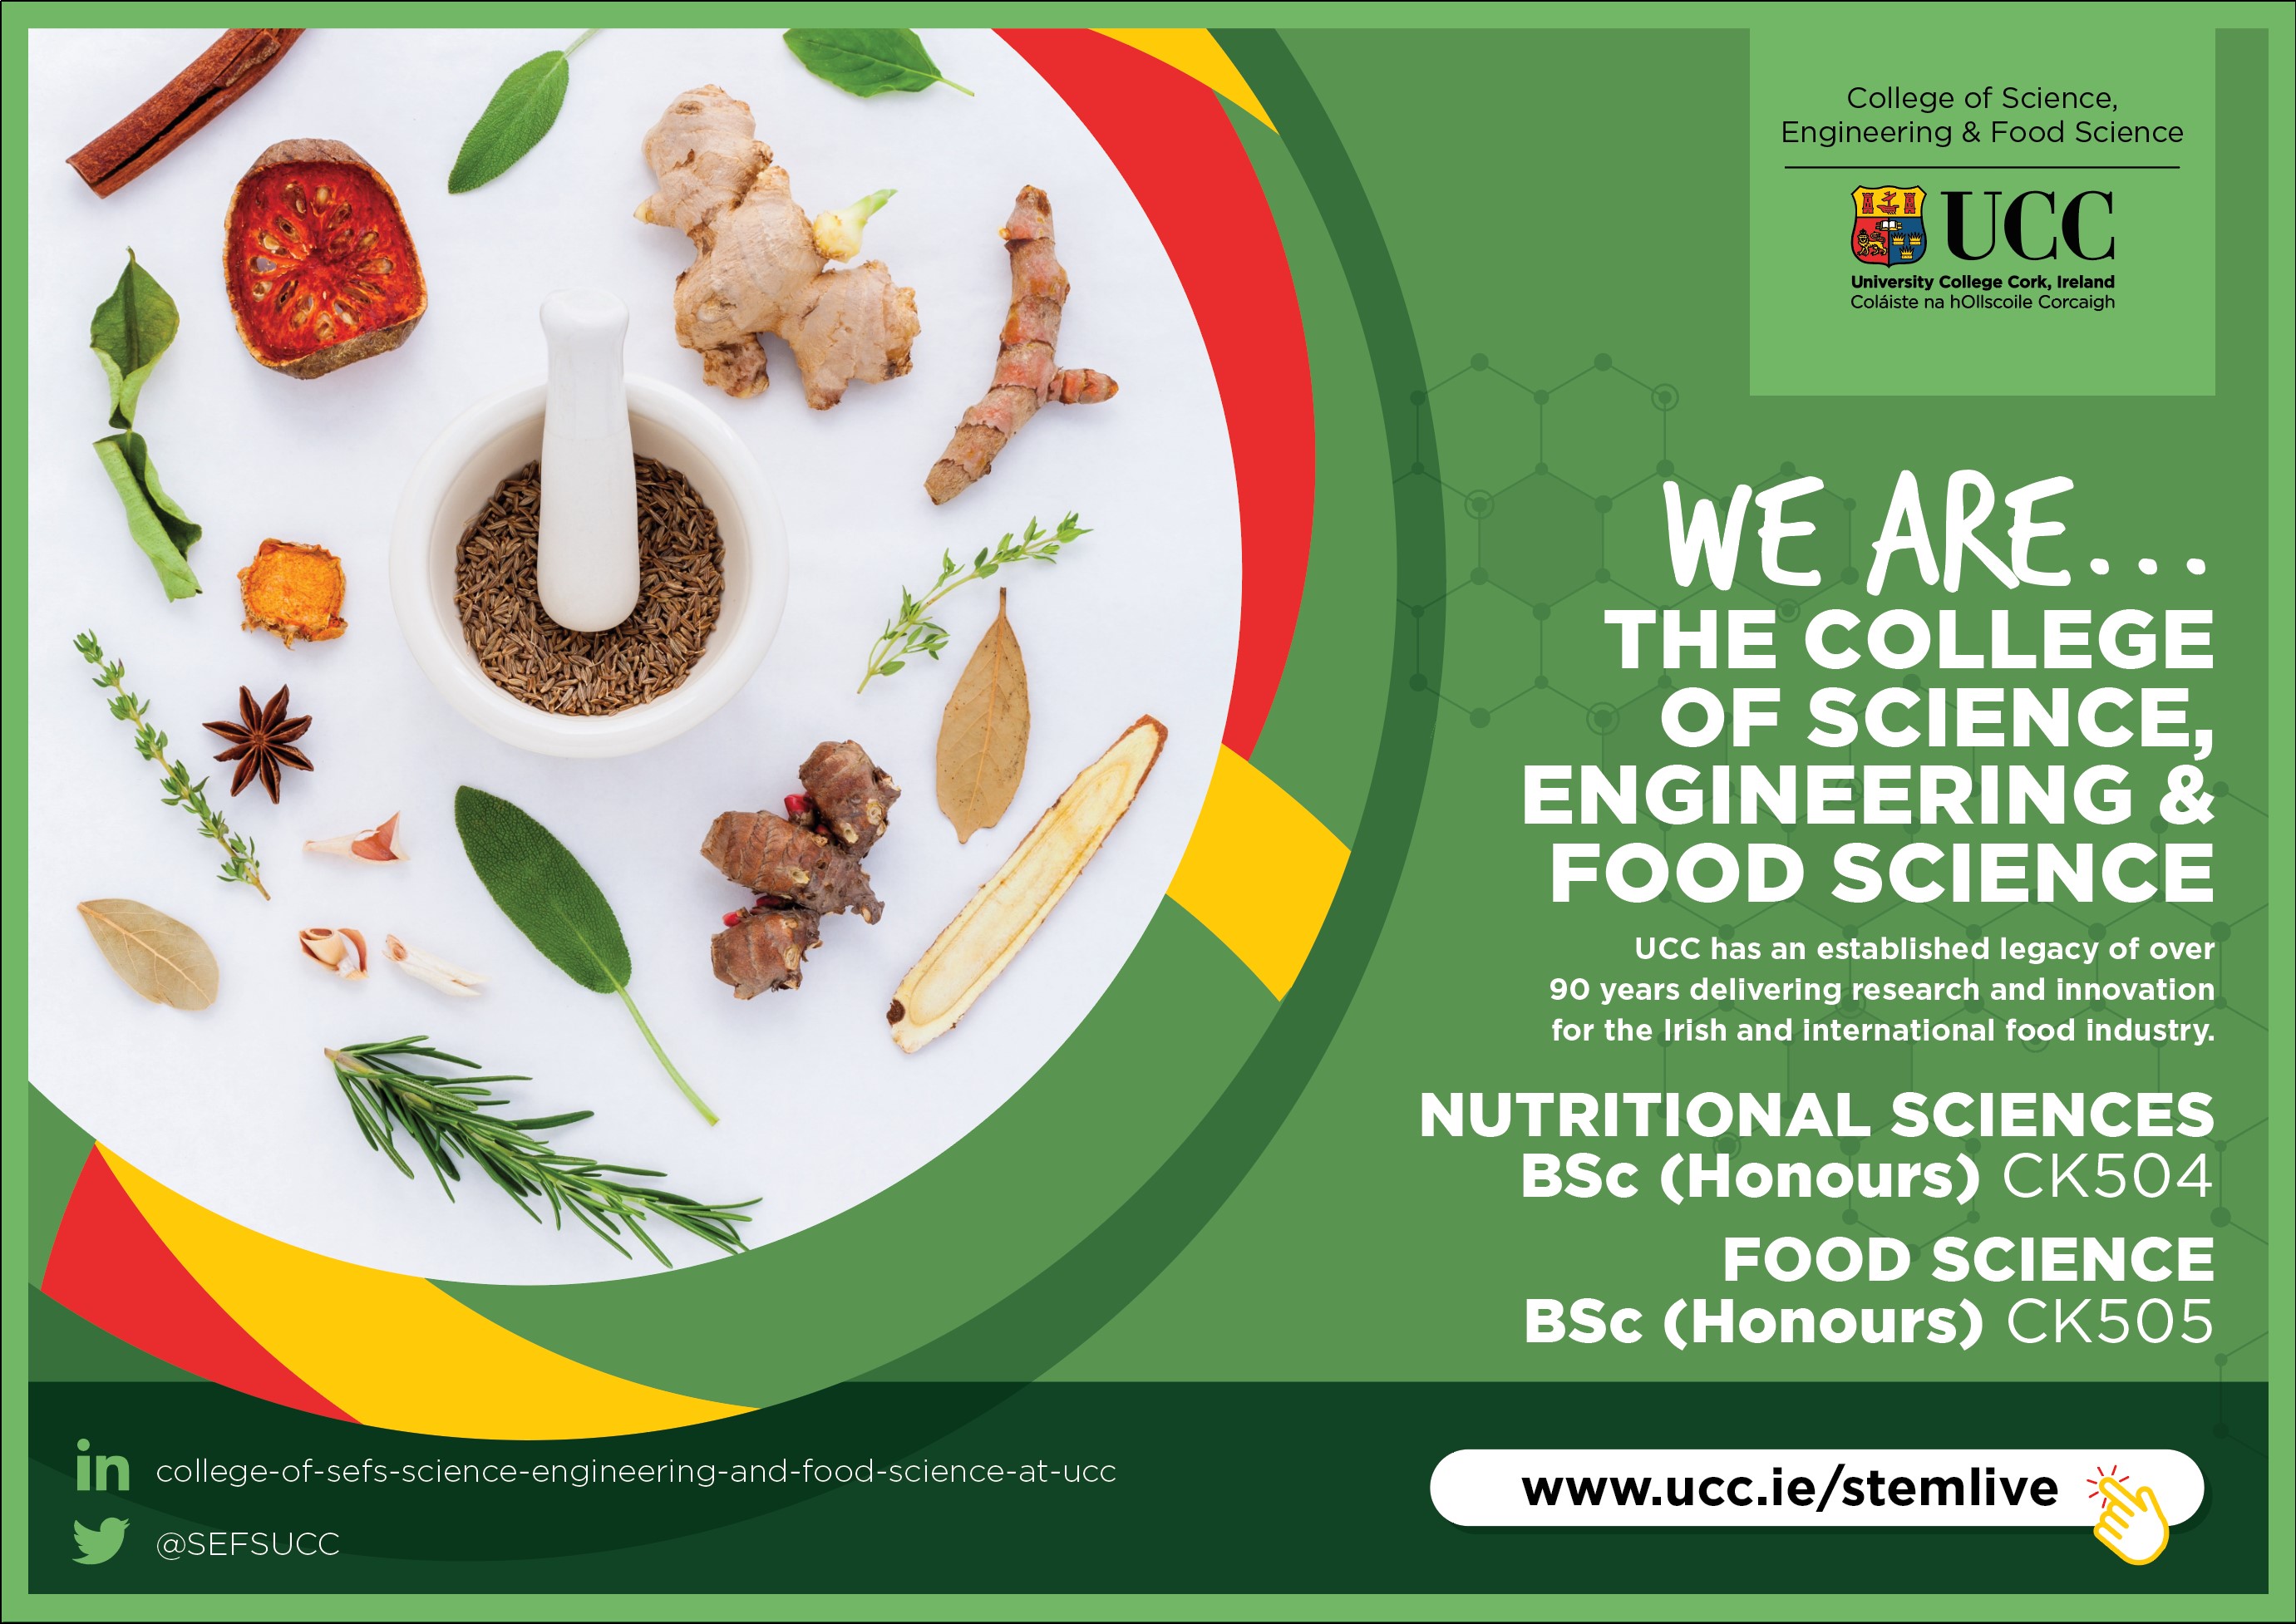 On April 22nd next at 17:00 GMT we will host a live Q&A for those interested in applying for Food Science and Nutritional Sciences at UCC